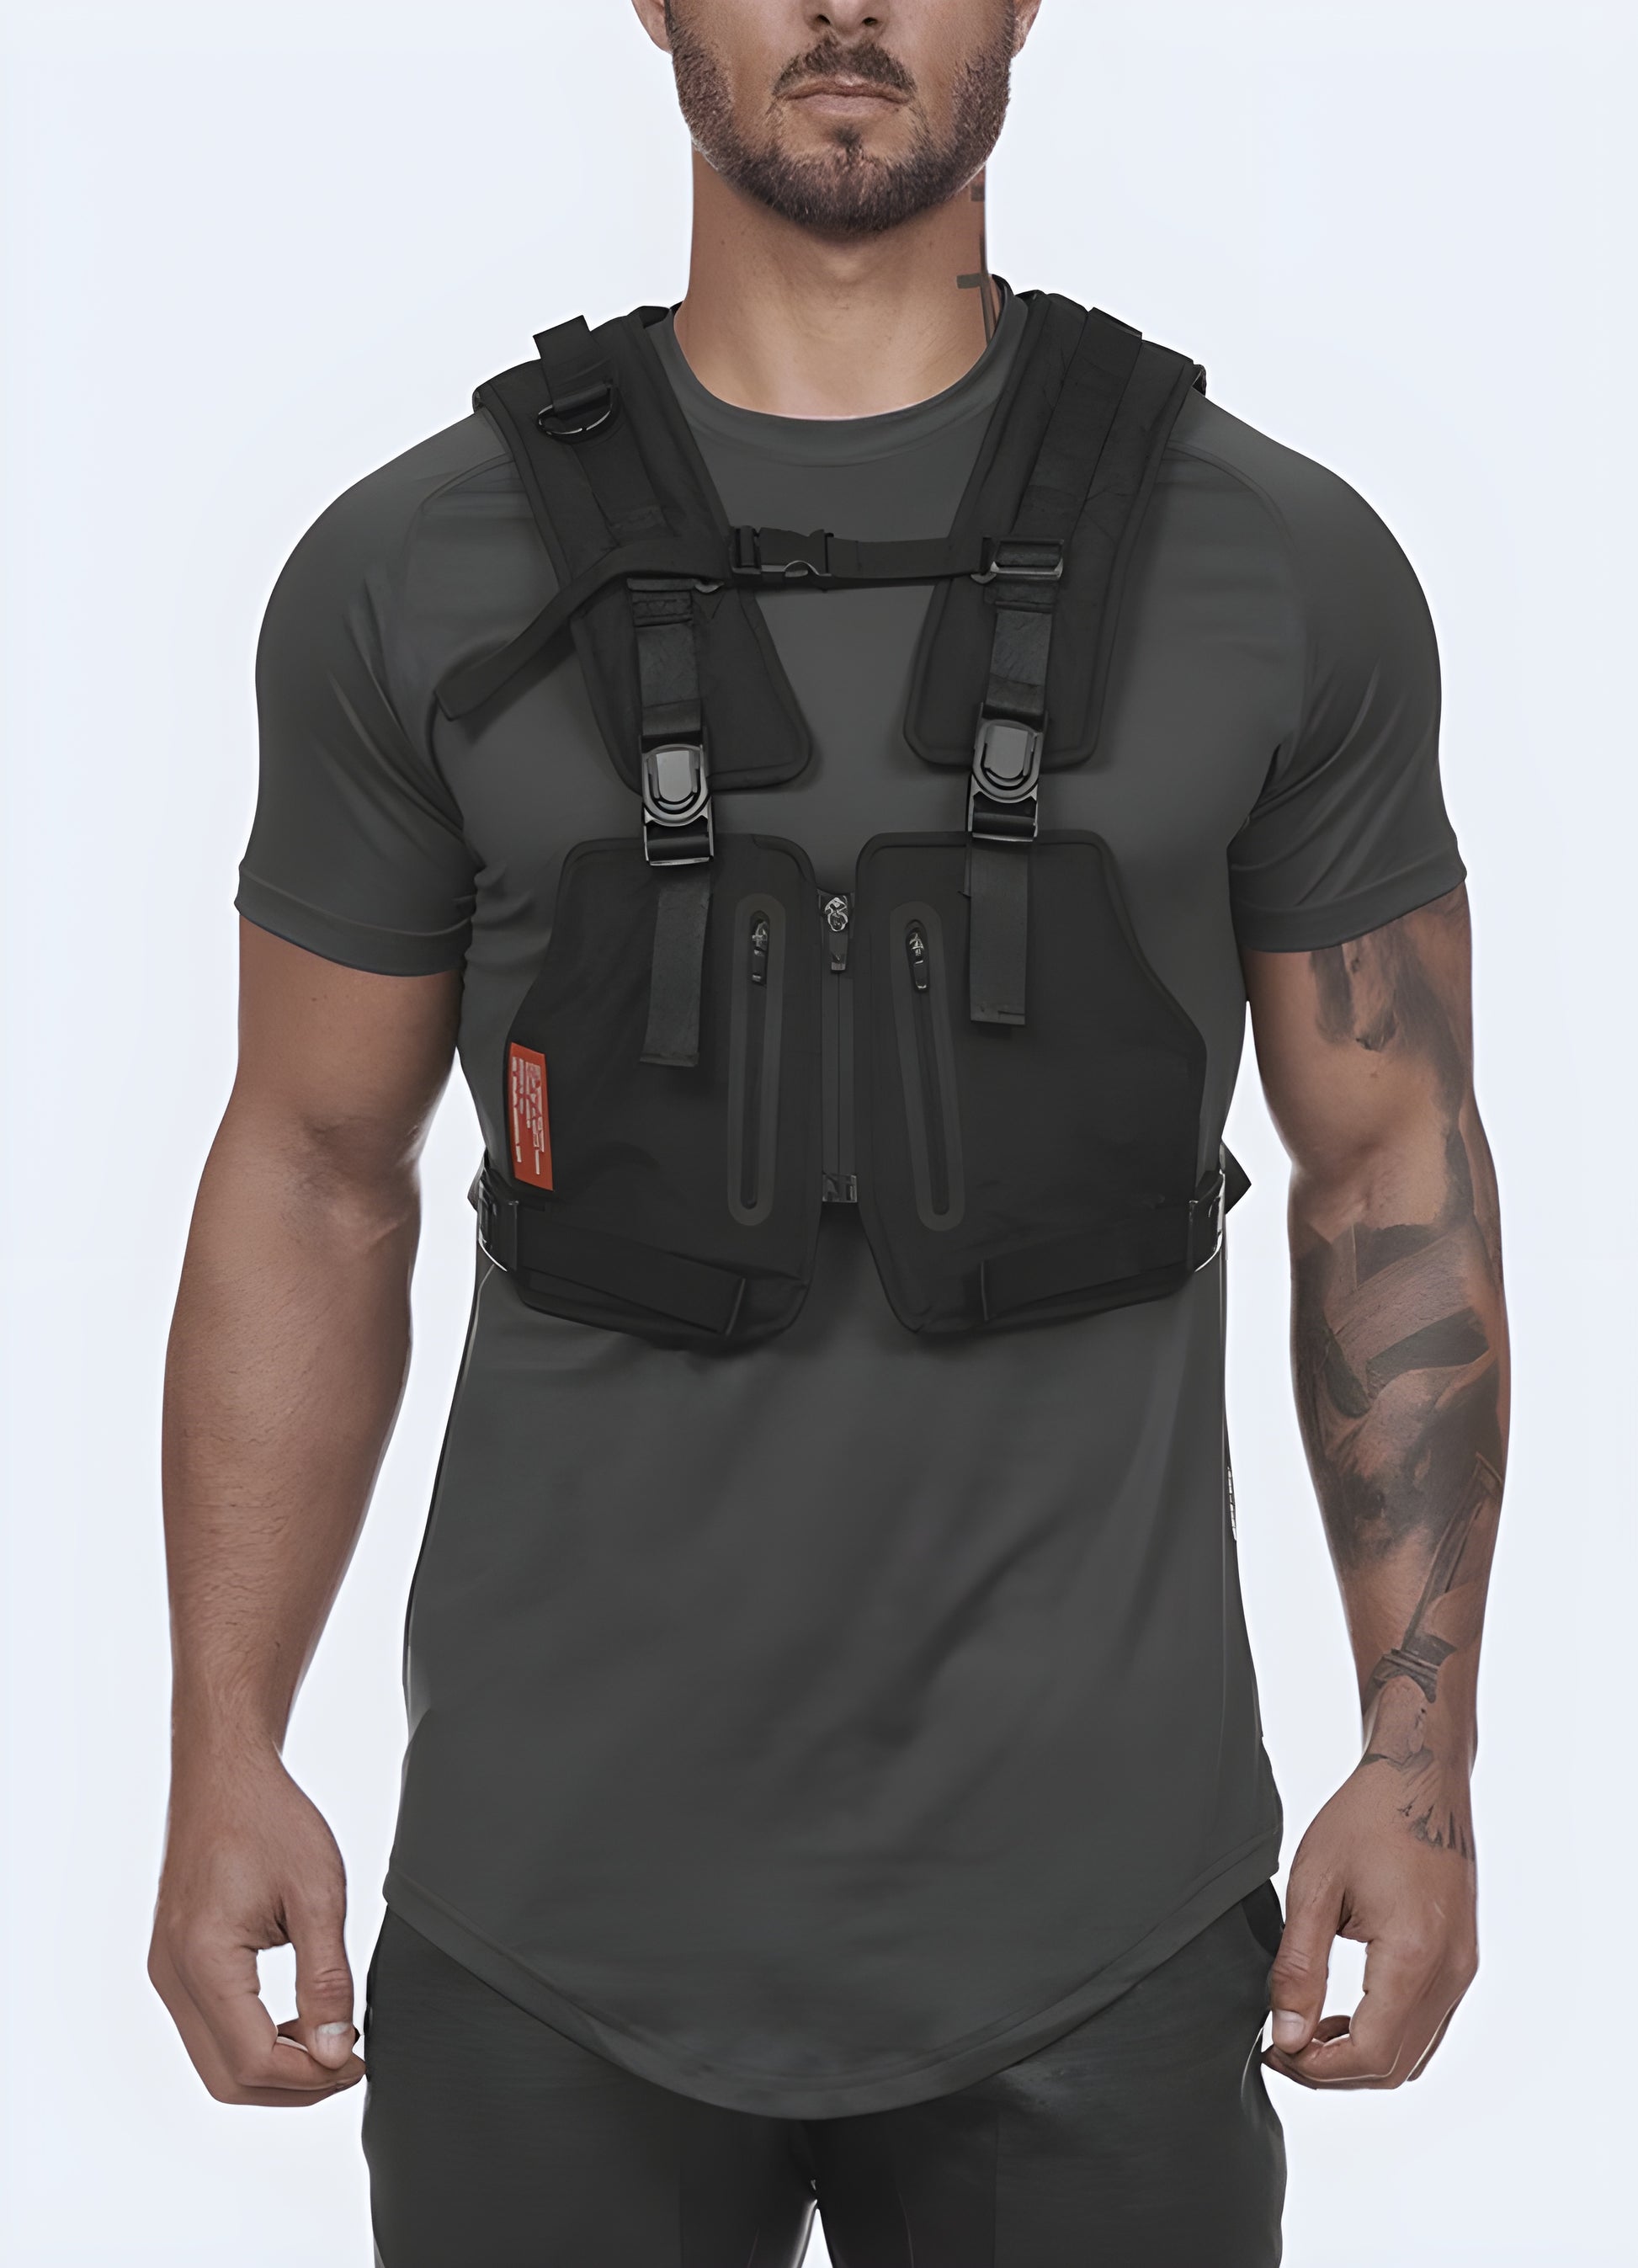 Beyond its aesthetic appeal, our utility chest rig is a testament to your commitment to excellence.